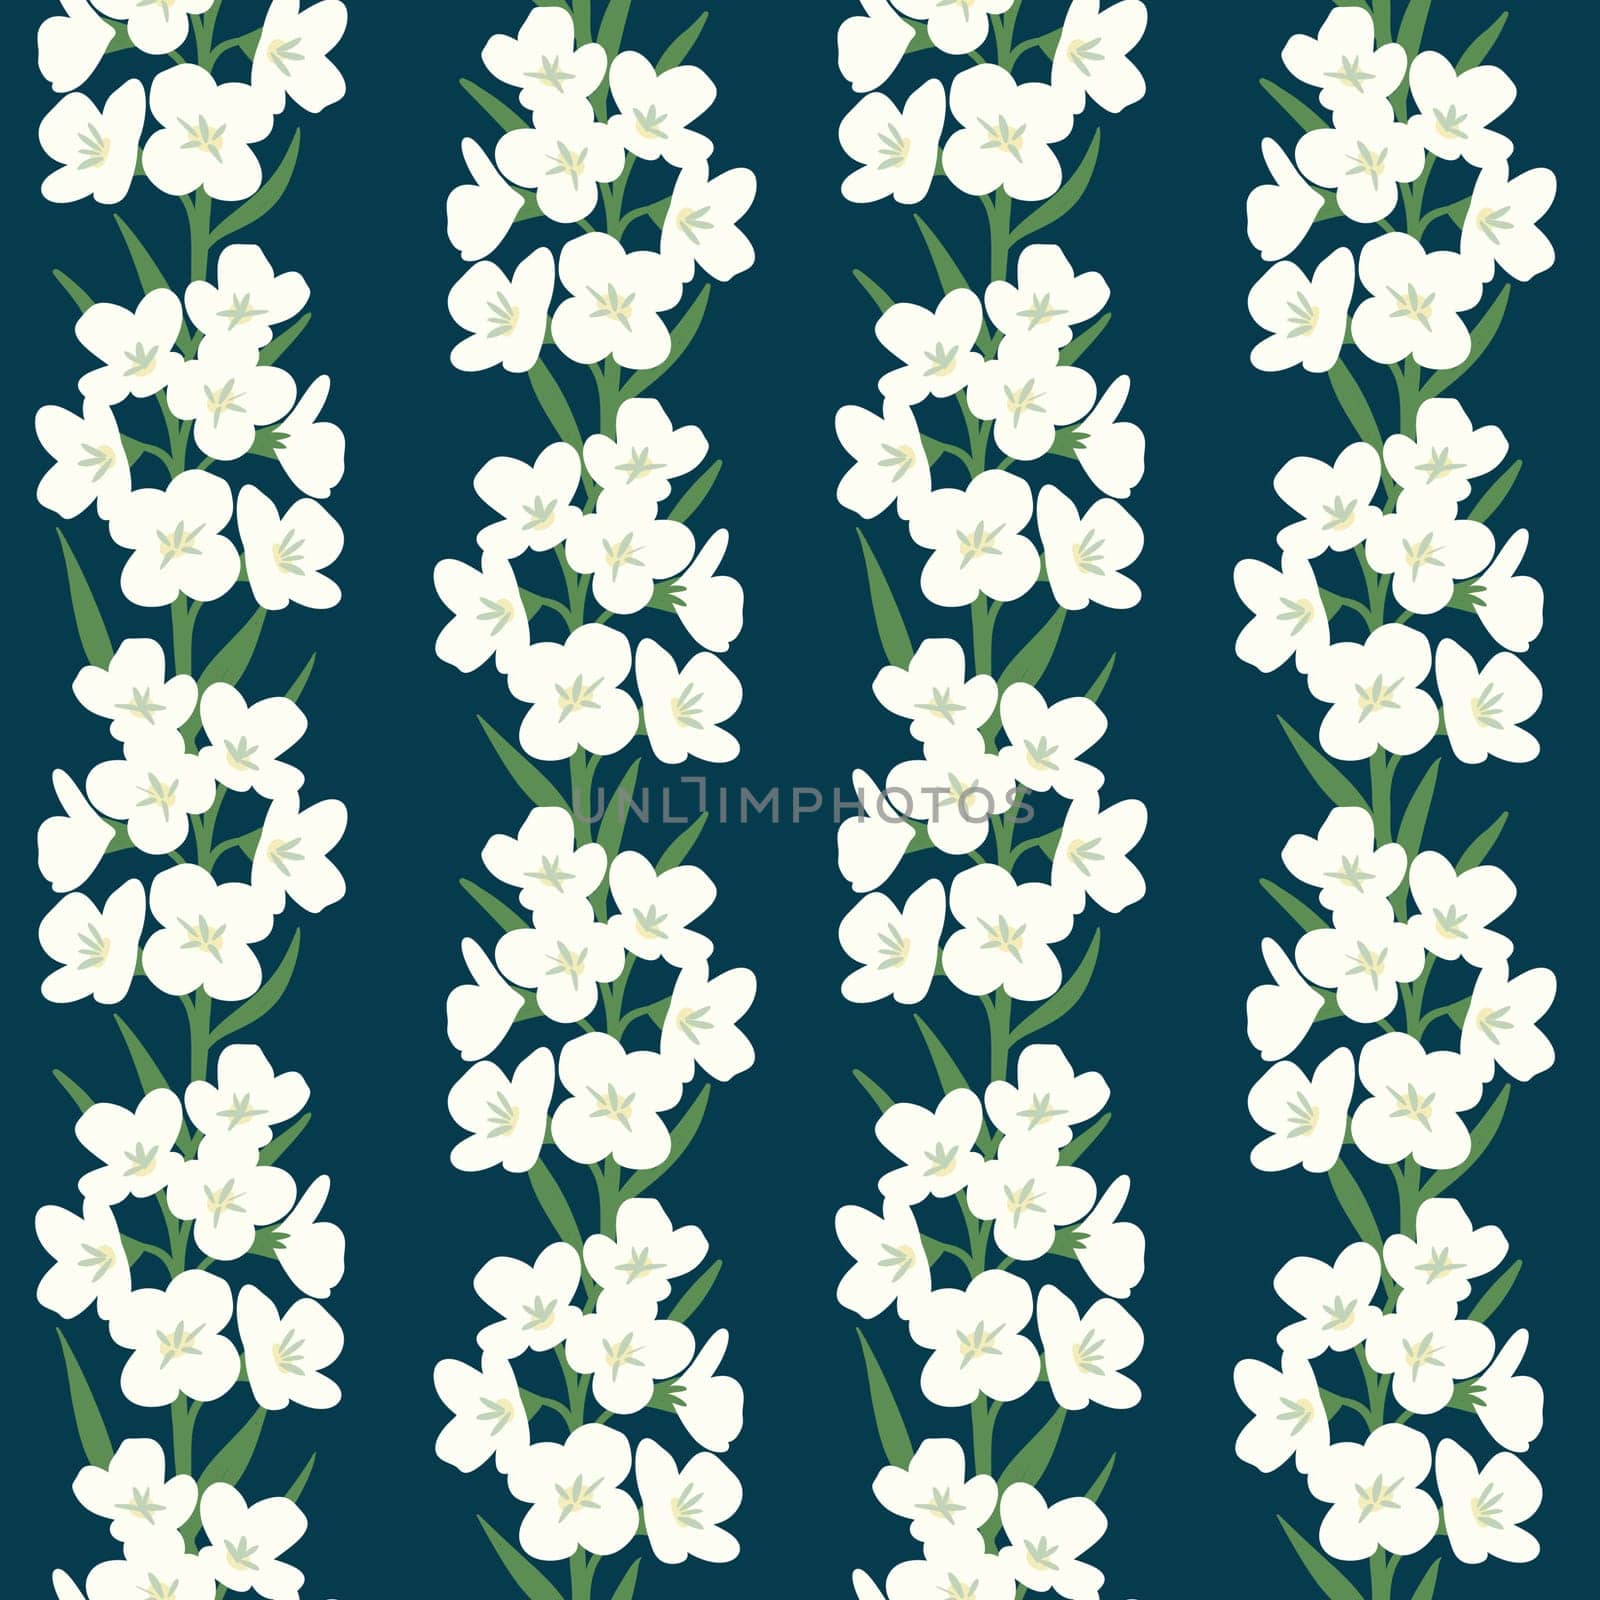 Hand drawn seamless pattern with white cuckoo flowers in vertical line on dark blue navy background. English meadow wildflower, floral wild plant, elegant victorian pattern, bloom blossom bouguet blooming botany design. by Lagmar